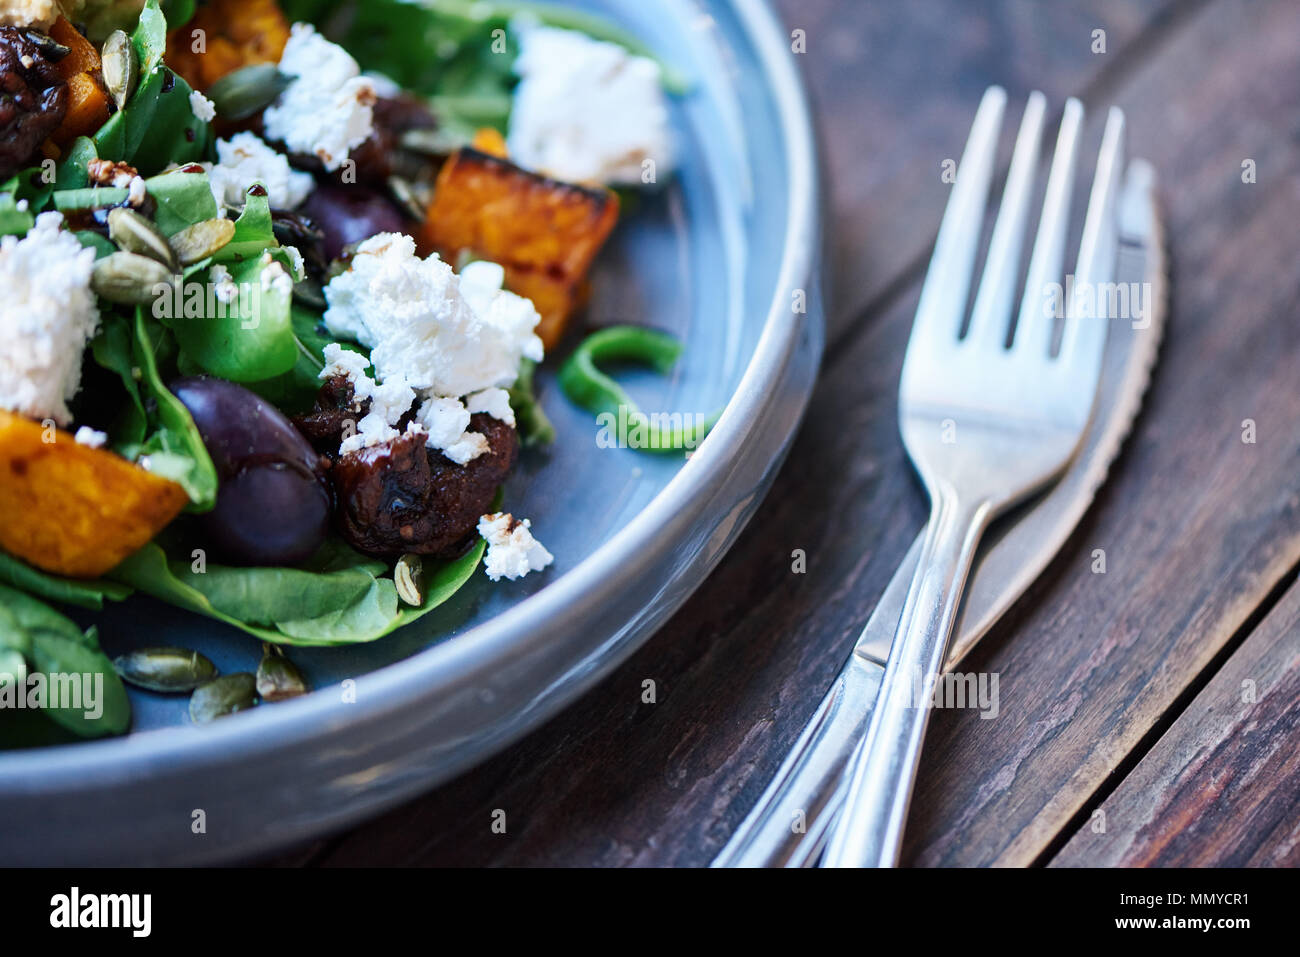 Delicious mixed salad sitting with cutlery on a wooden table Stock Photo